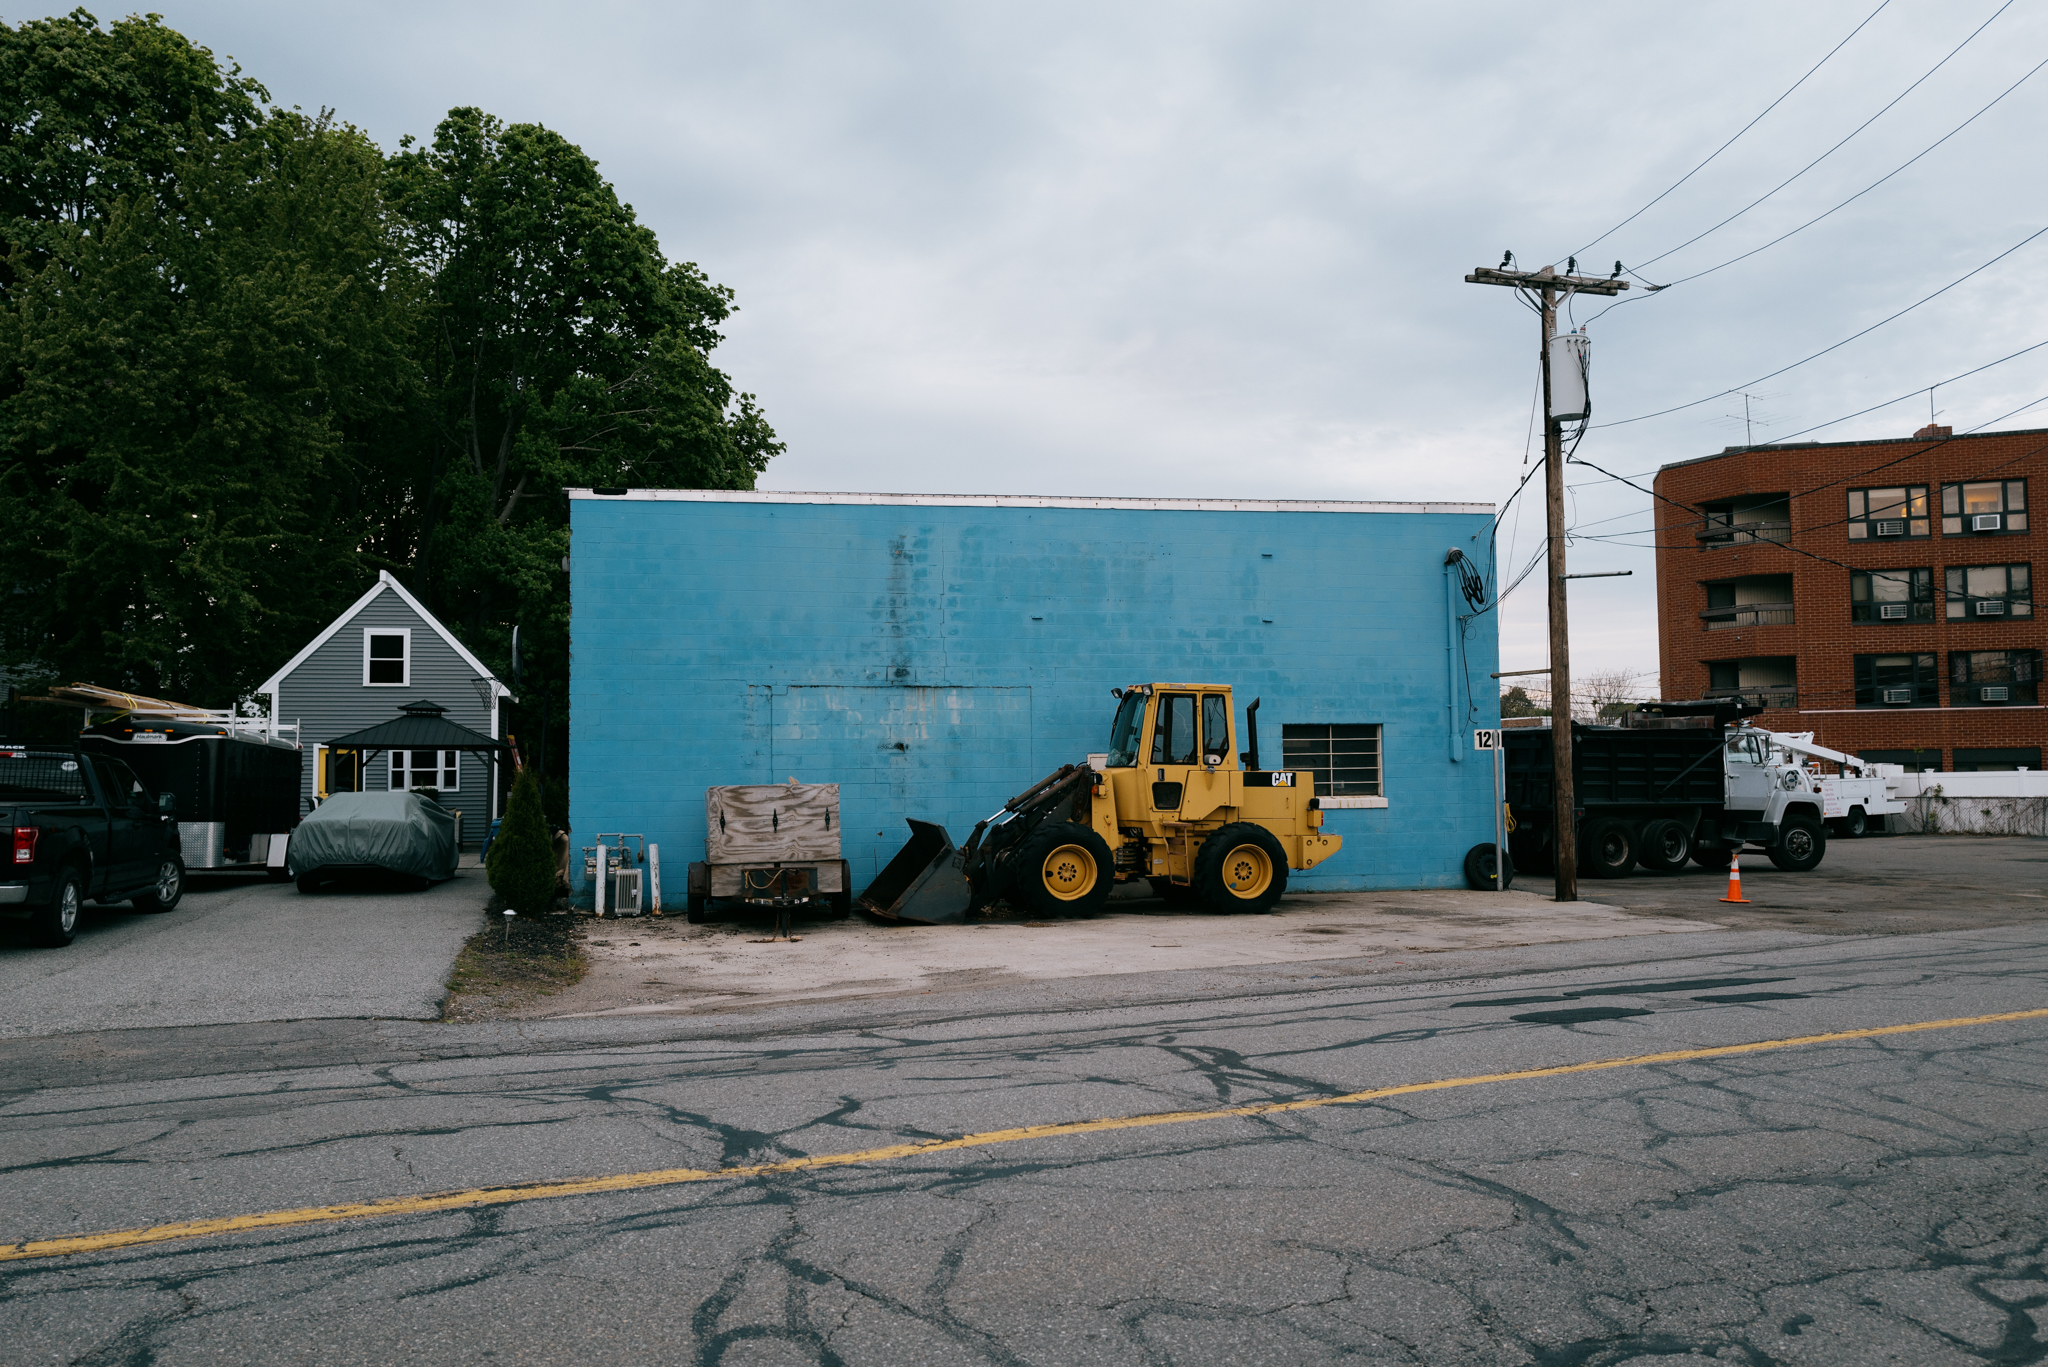 A bulldozer in a parking lot. Image captured with a Leica Q2